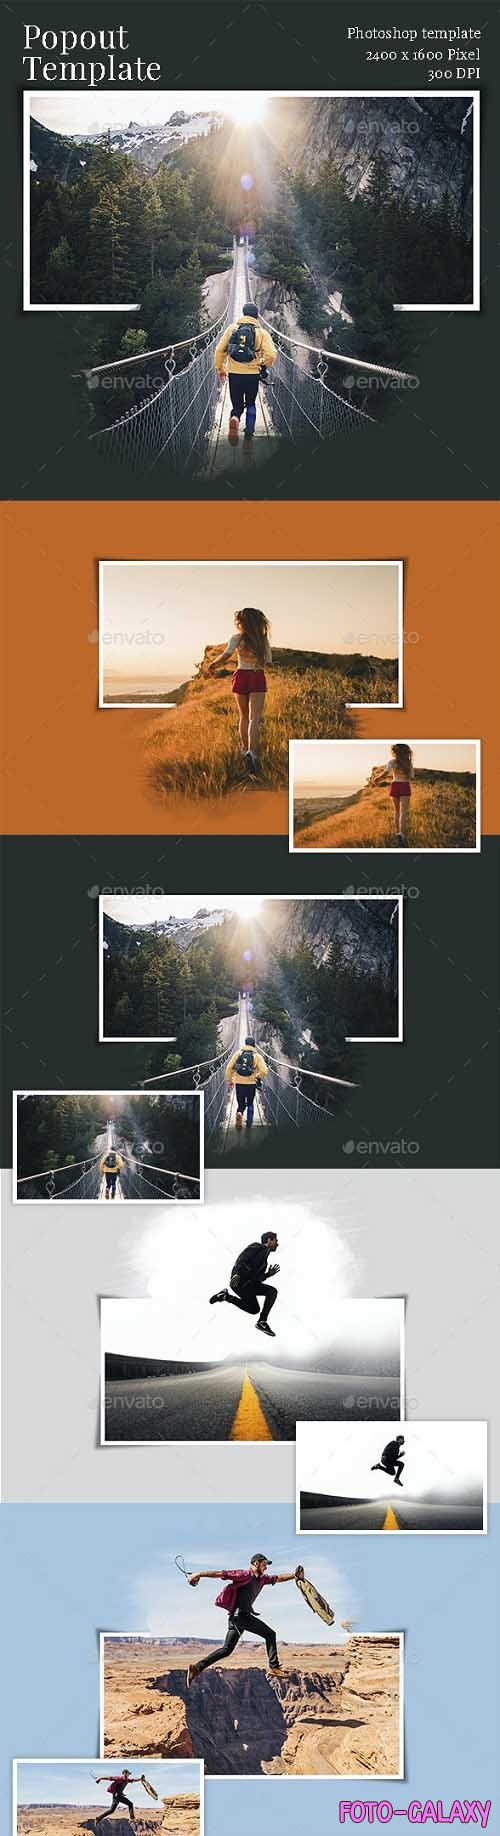 Popout Photo Template - 32807988